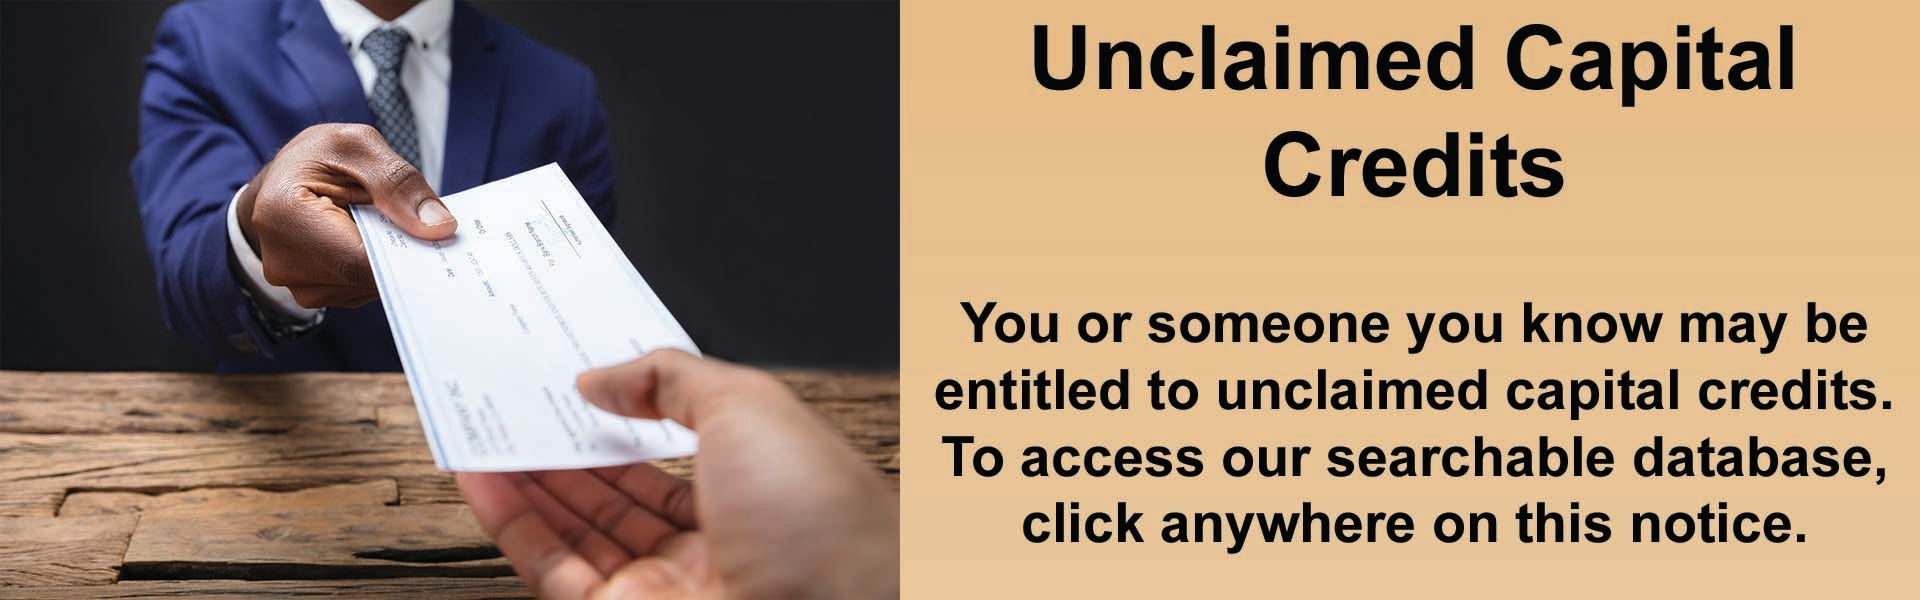 Unclaimed Capital Credits link